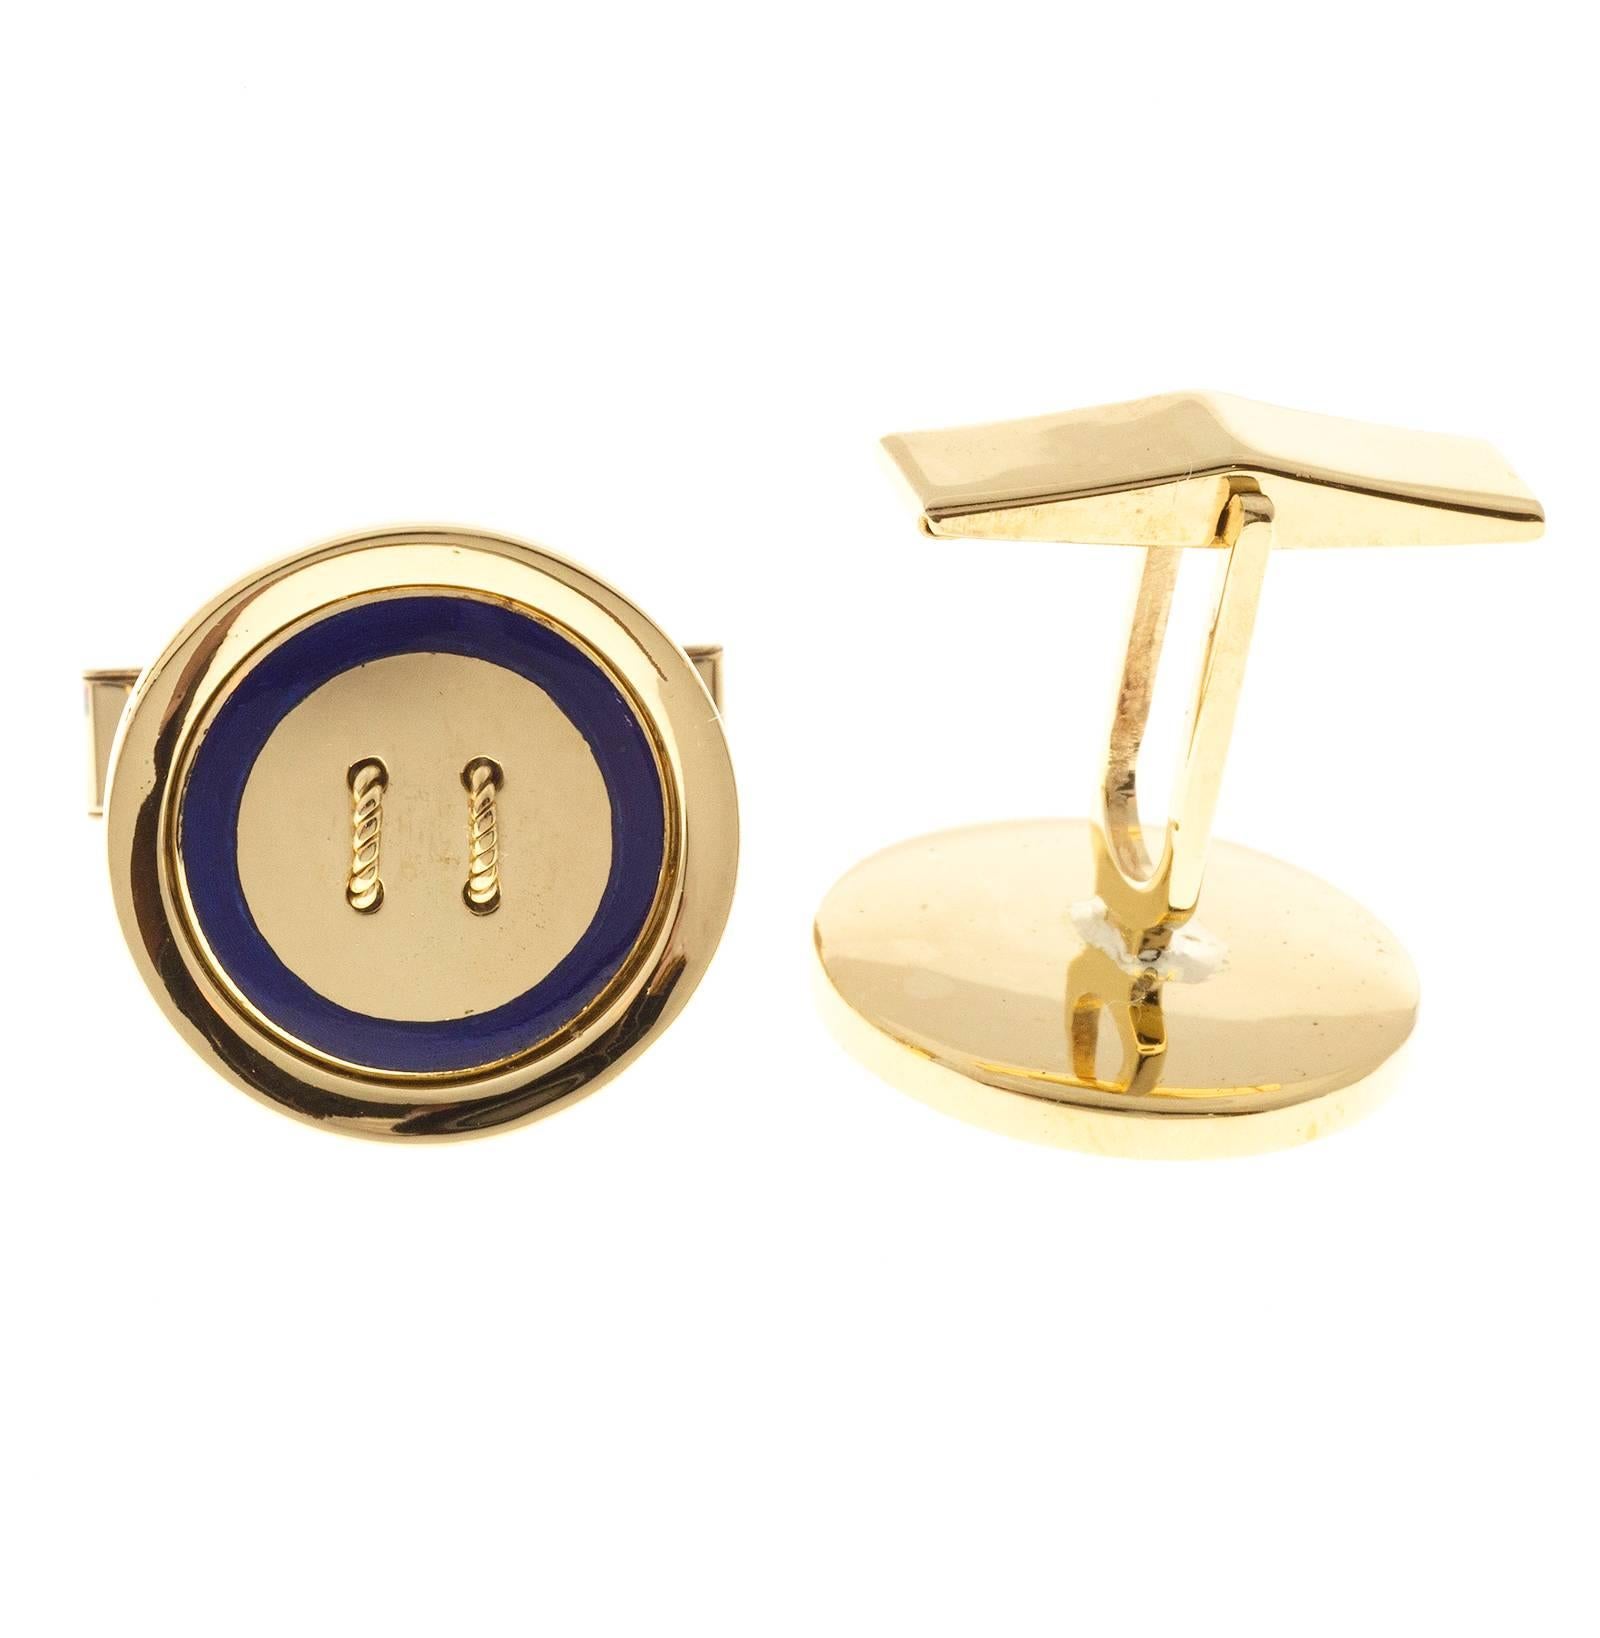 Round button style solid 18k yellow gold cuff links with a blue enamel rim. Circa 1960.

18k yellow gold
Tested and stamped:  18k
19.9 grams
Top to bottom: 21.12mm or .83 inch
Width:  18.61mm or .73 inch
Depth: 3.40mm
